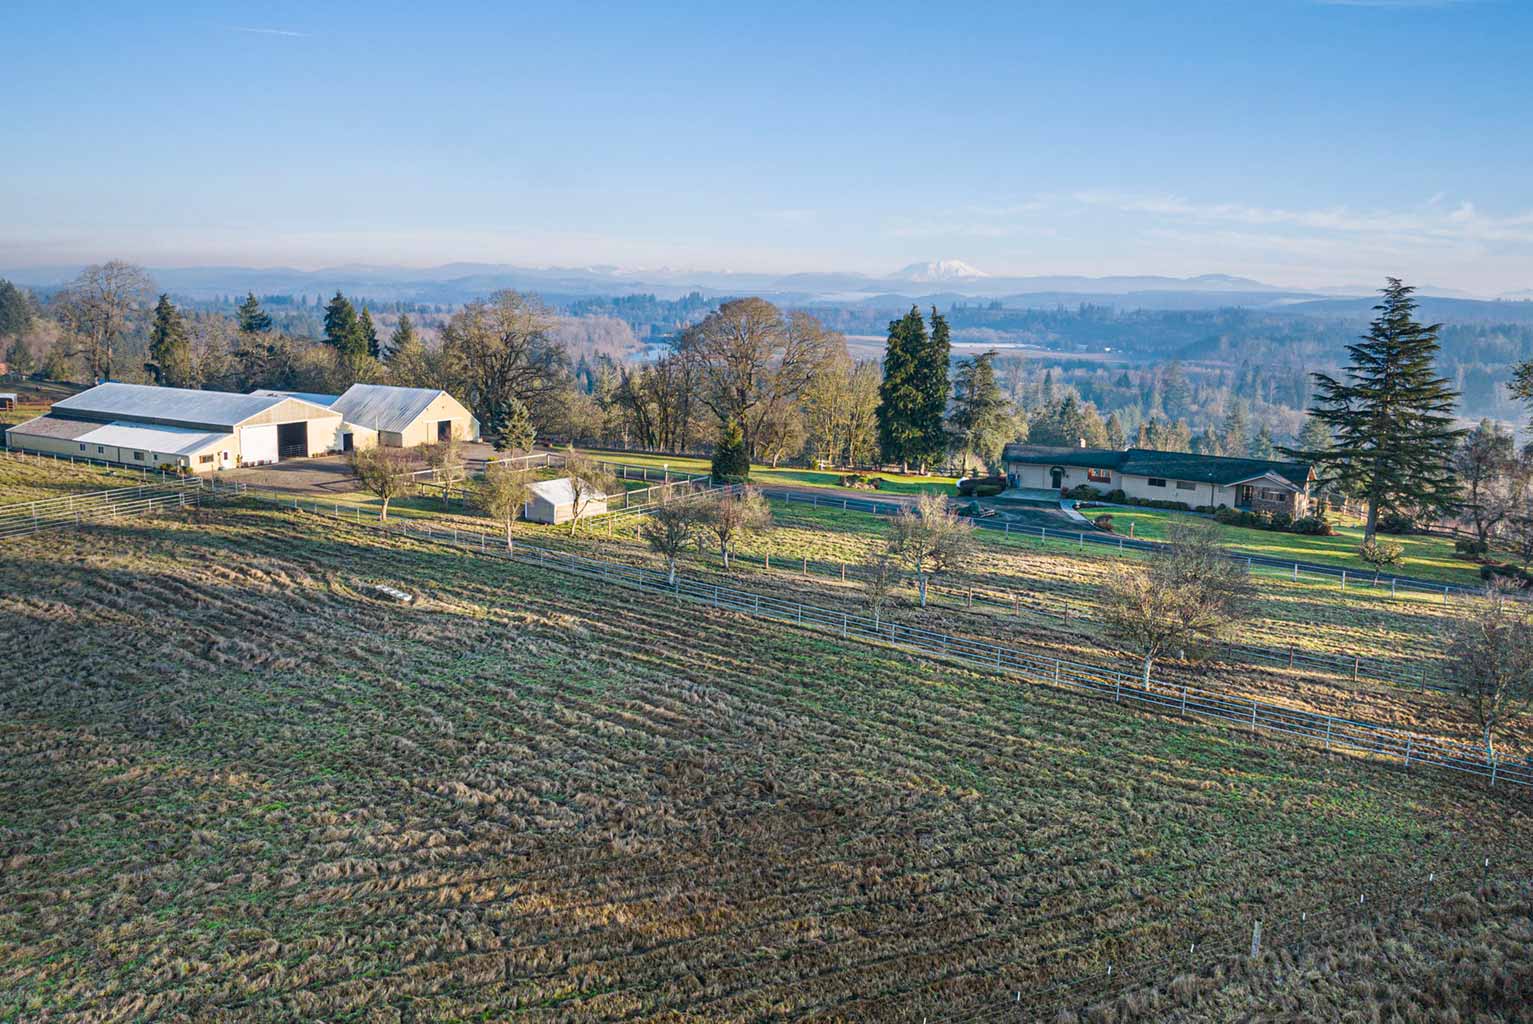 Property sits up above the Cowlitz River valley